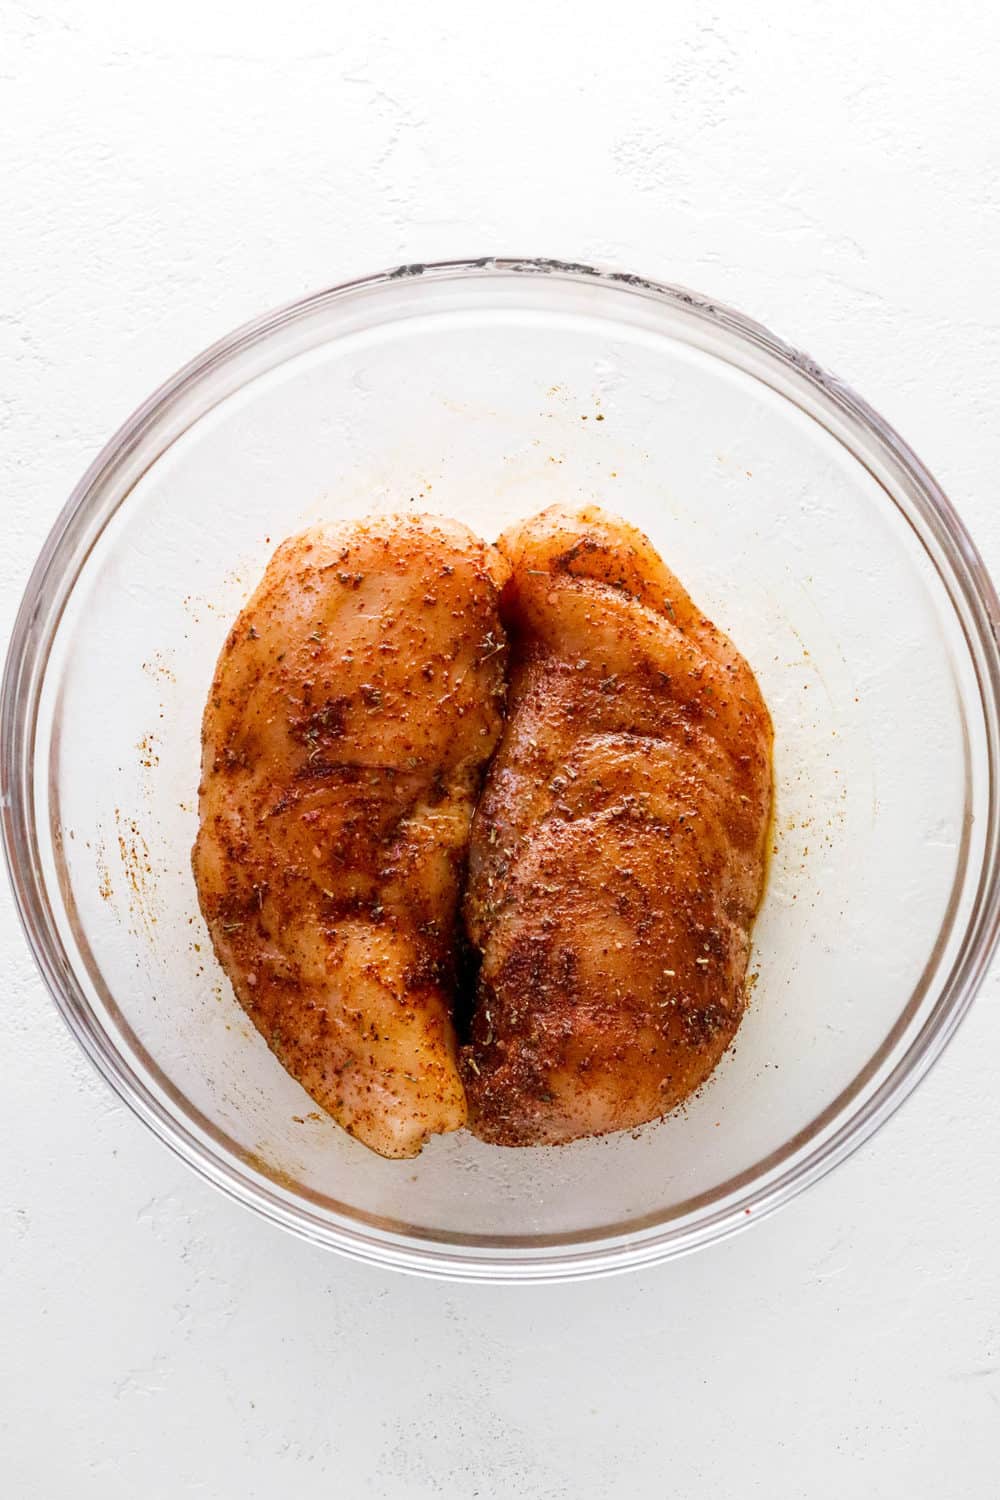 Two pieces of chicken breast covered in a spice rub inside a round glass bowl